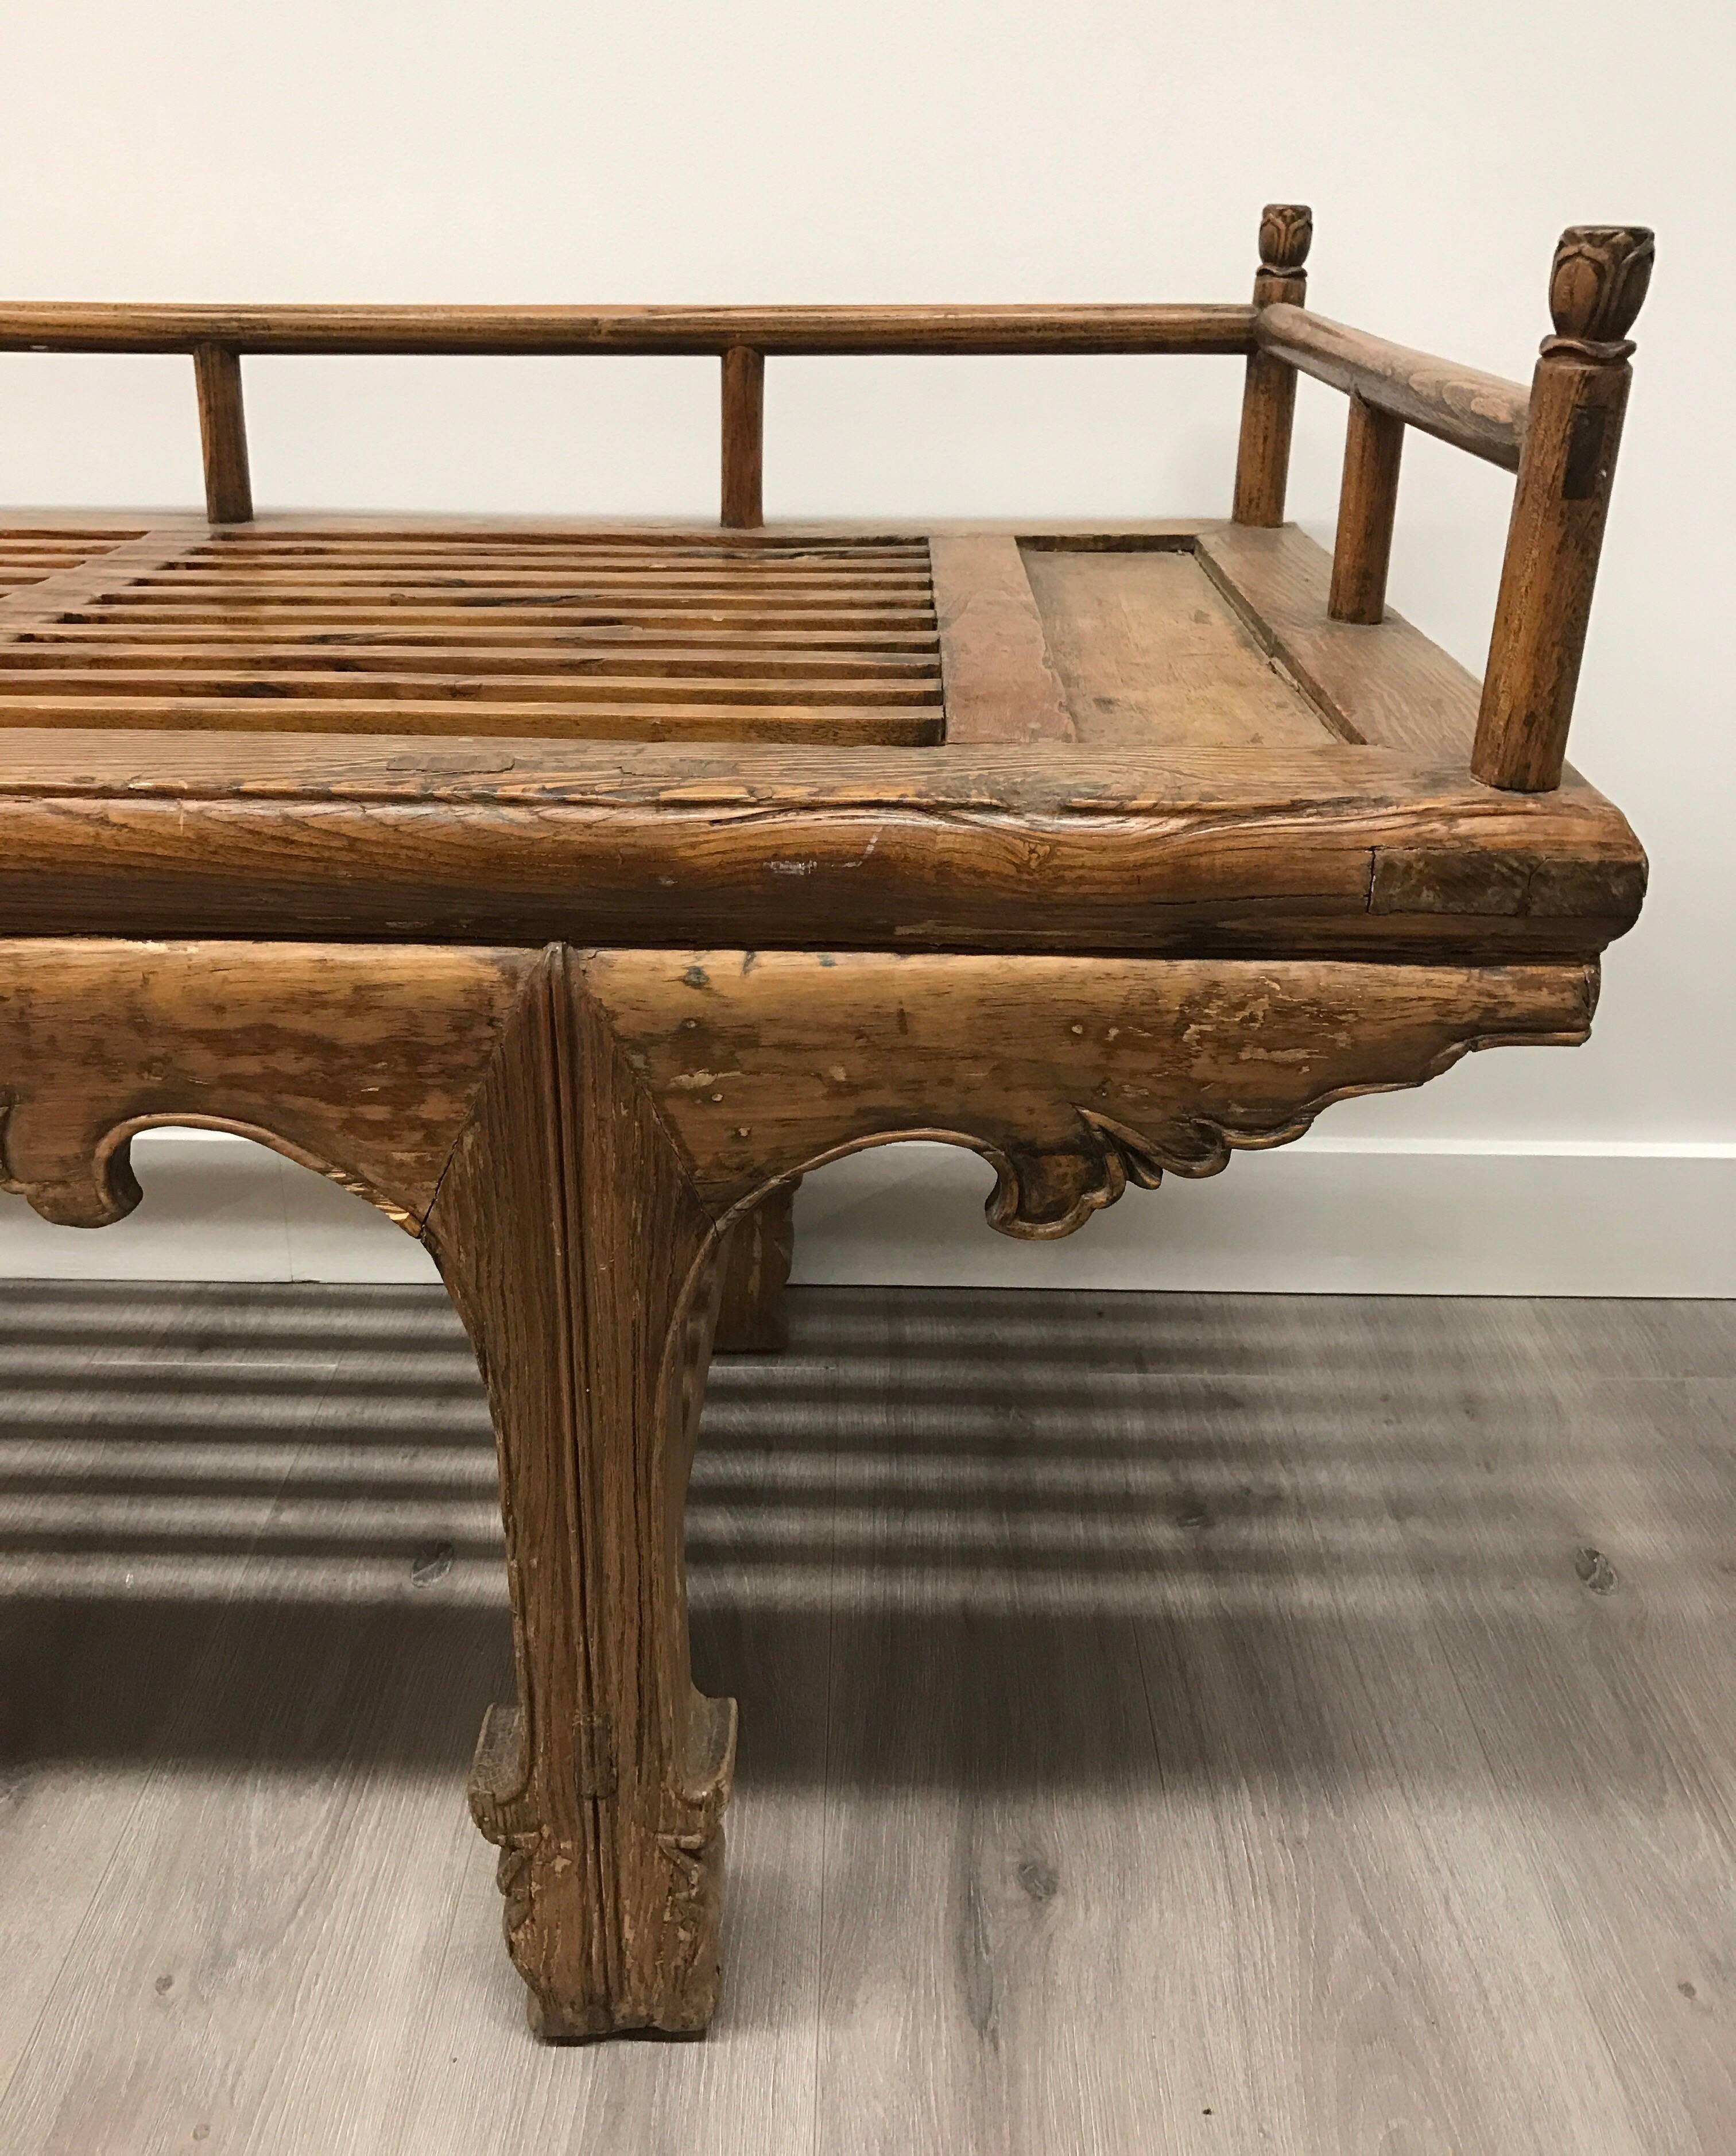 19th century Chinese slatted daybed with scalloped and carved apron and feet.